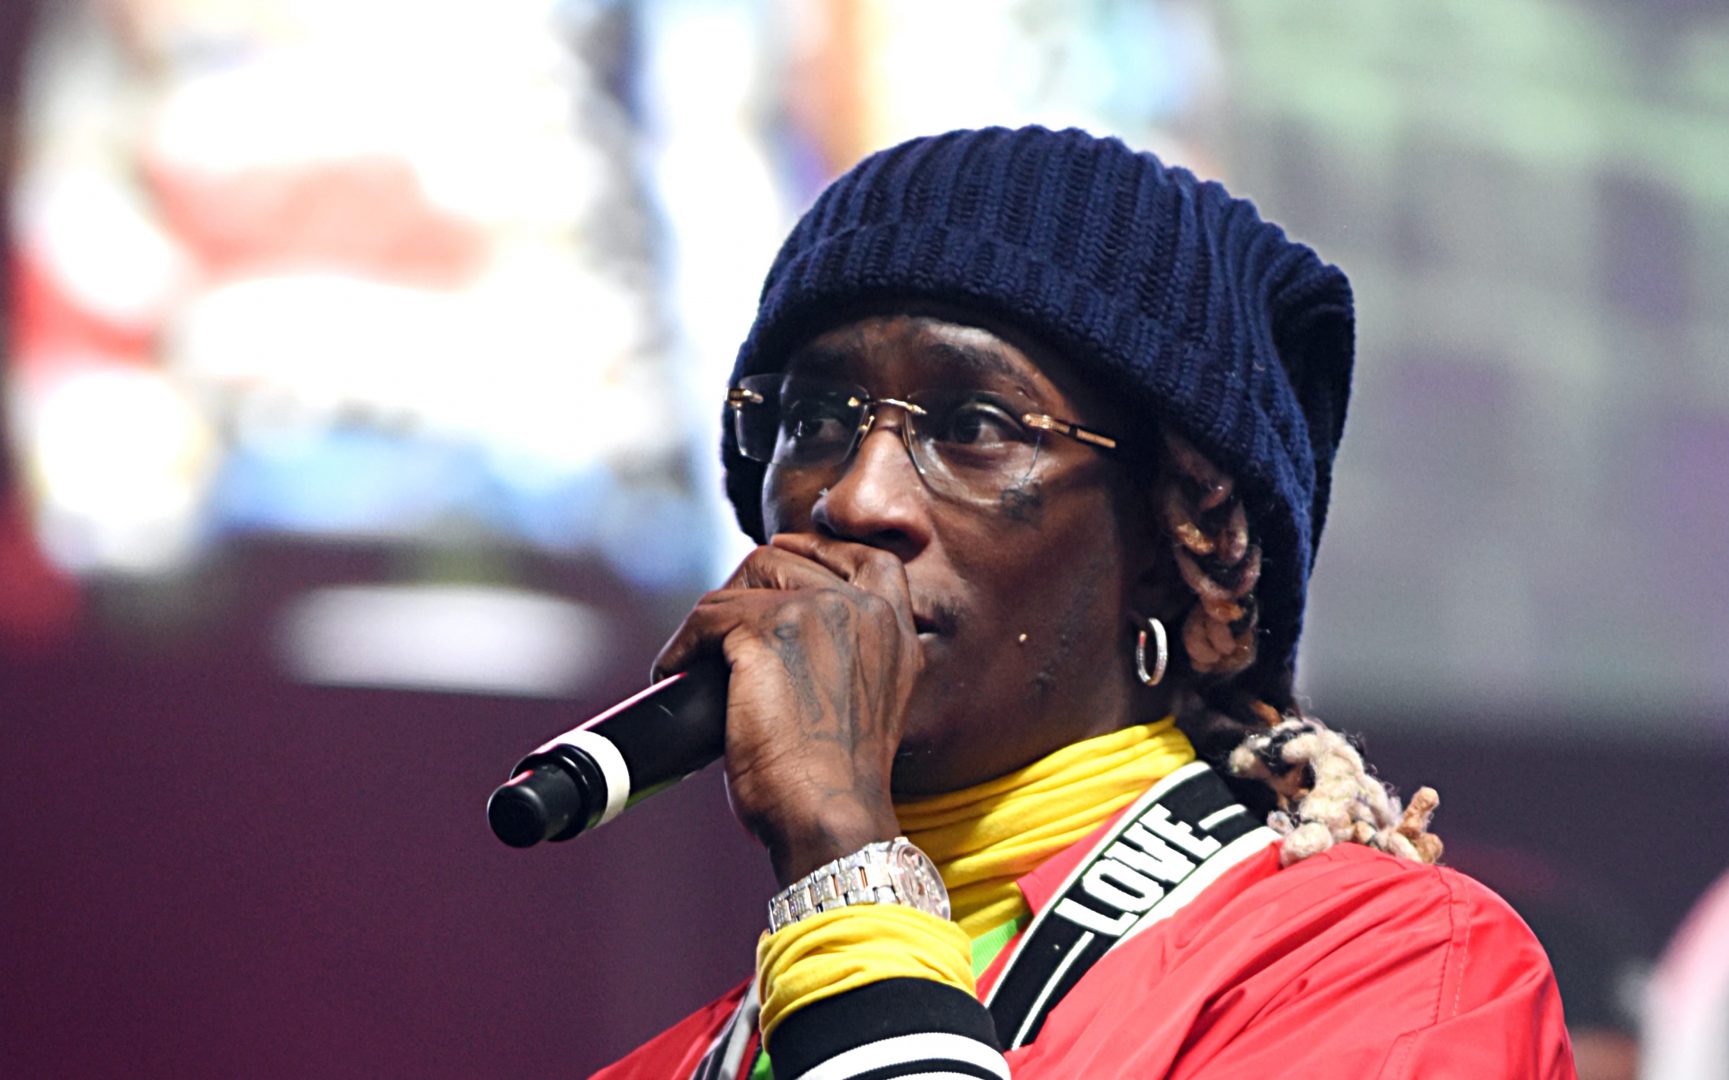 Young Thug facing additional charges in RICO case